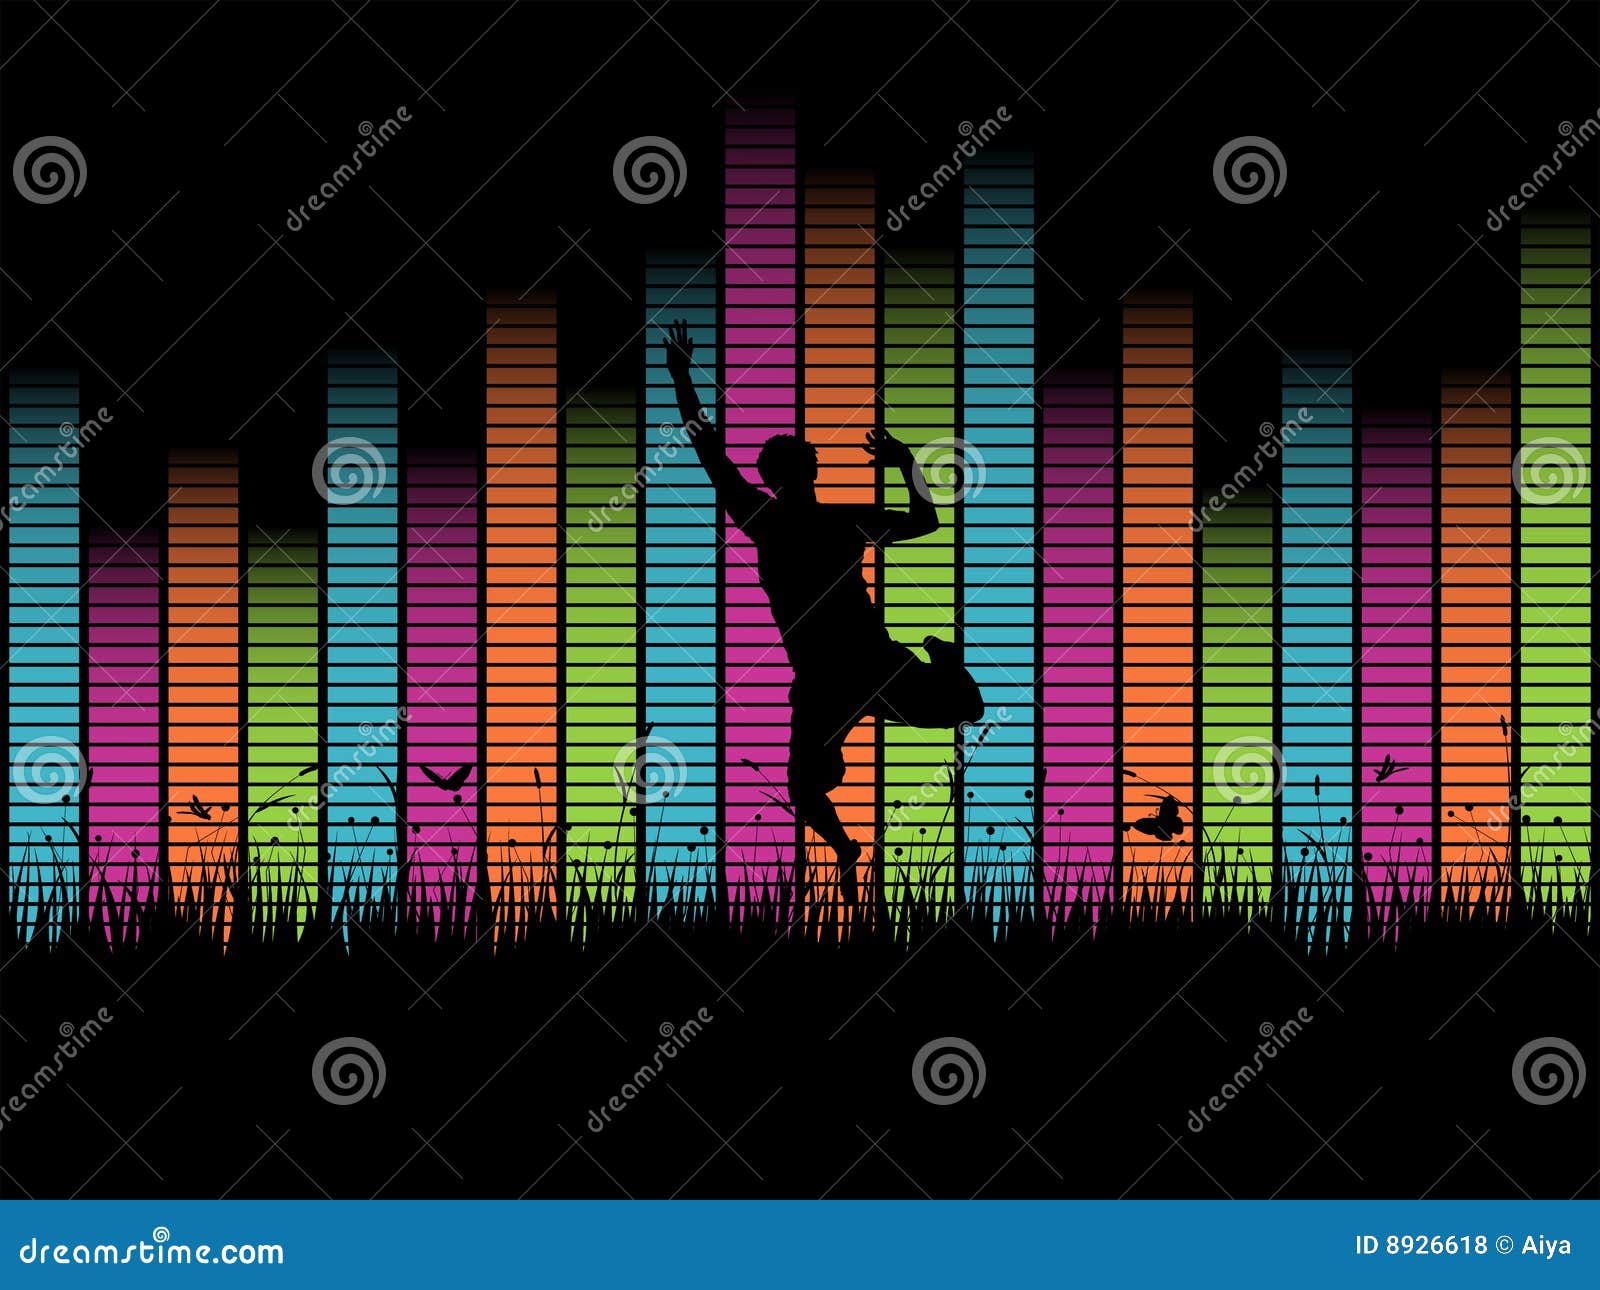 jumping person in front of music beats.